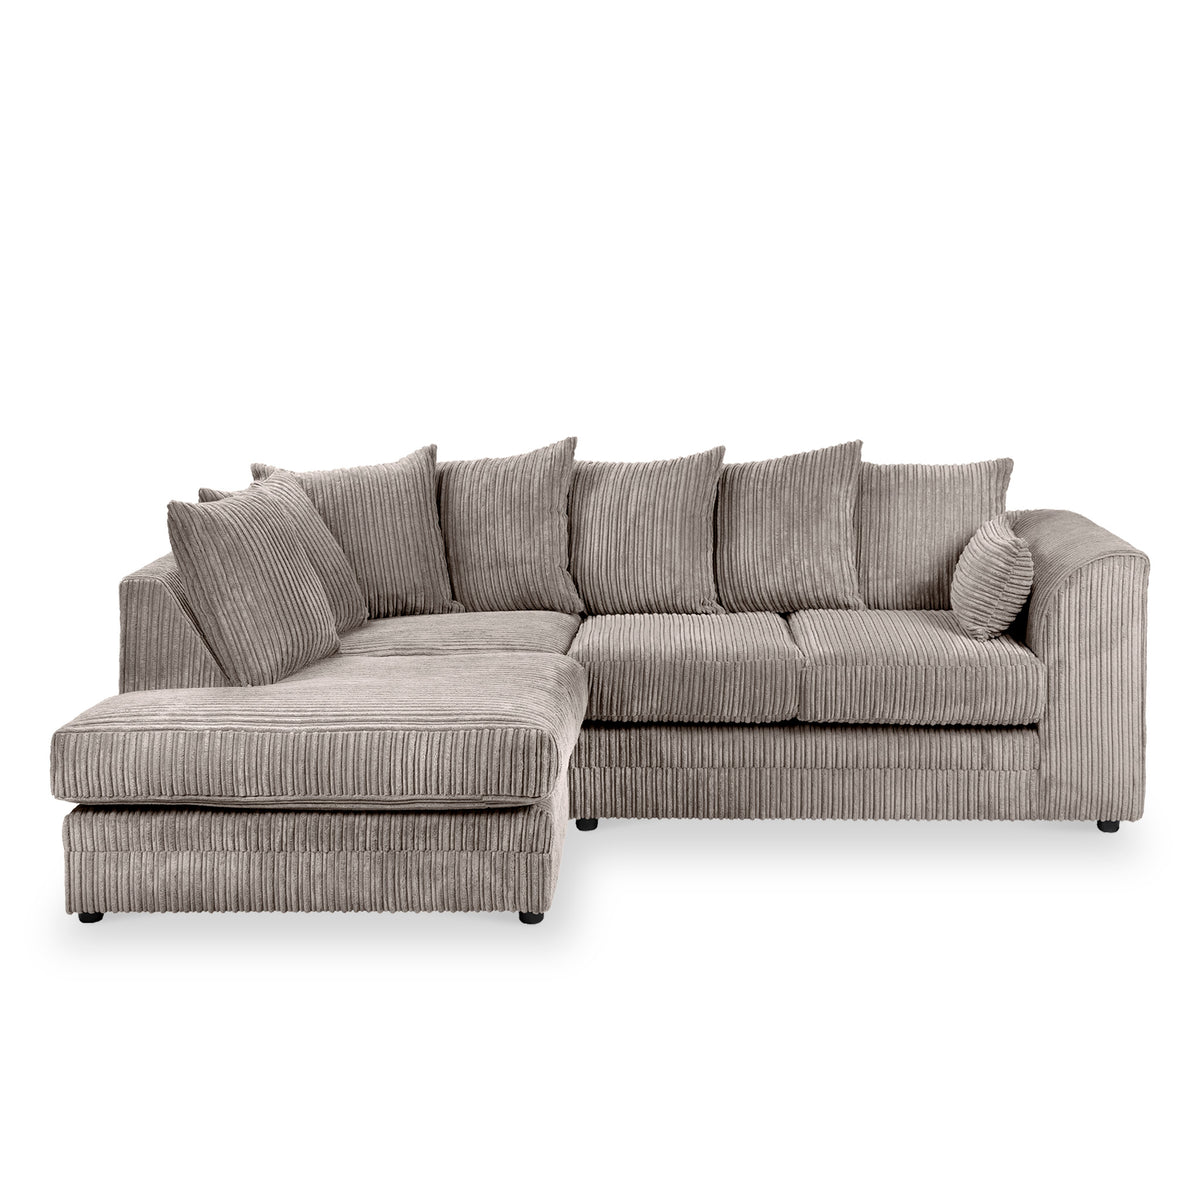 Bletchley Charcoal Left Hand Jumbo Cord Chaise Sofa from Roseland furniture